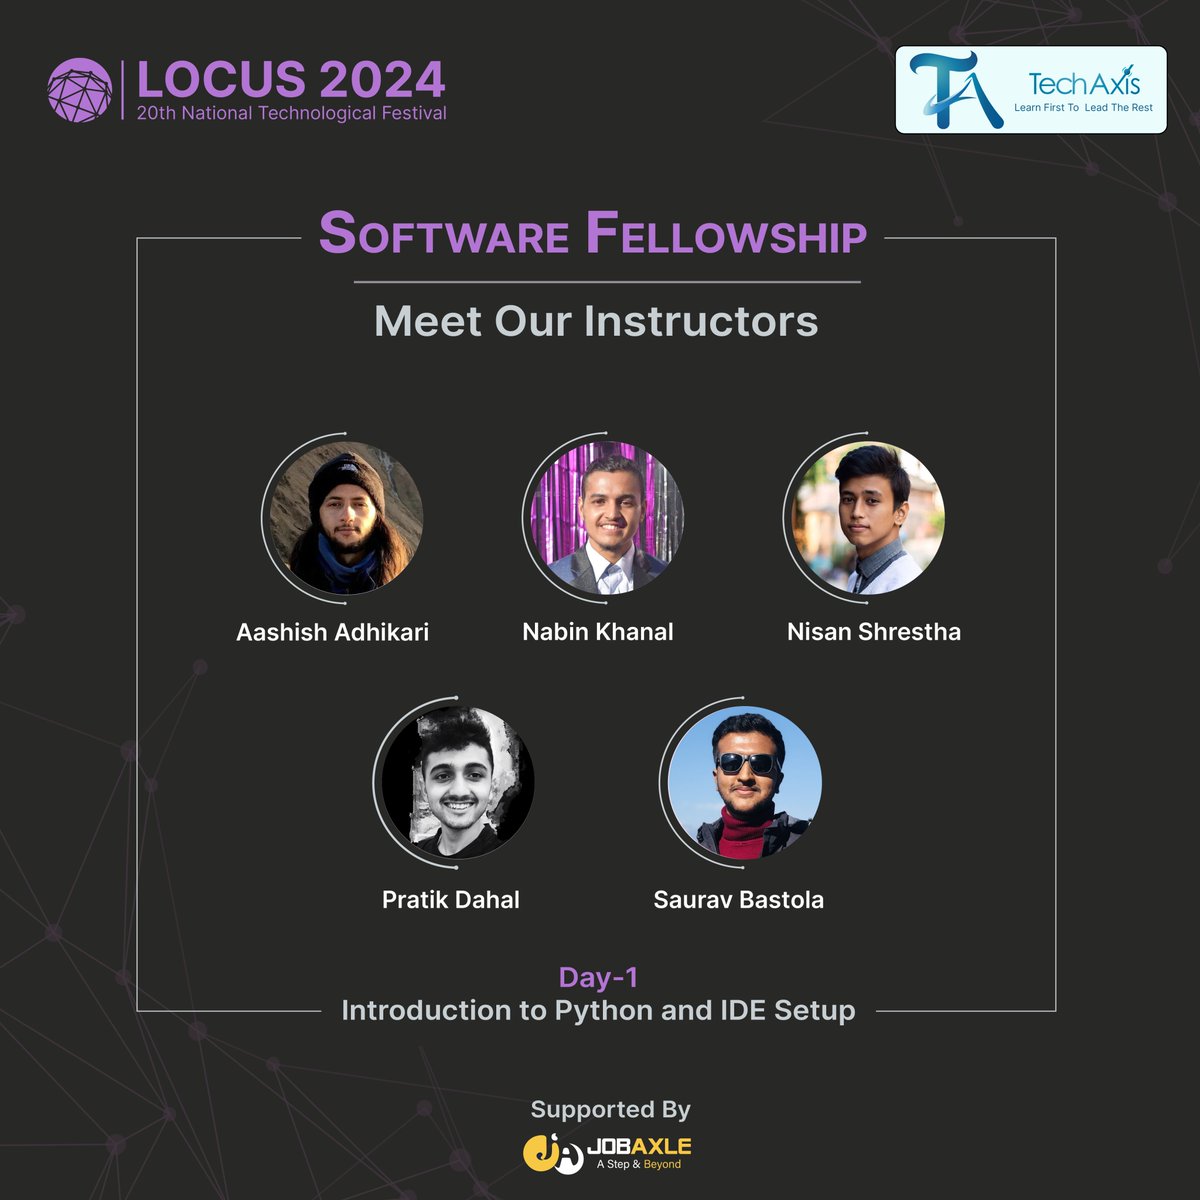 Unveiling the Python Experts Driving Our Software Fellowship Day 1!
#LOCUS2024 #SoftwareFellowship